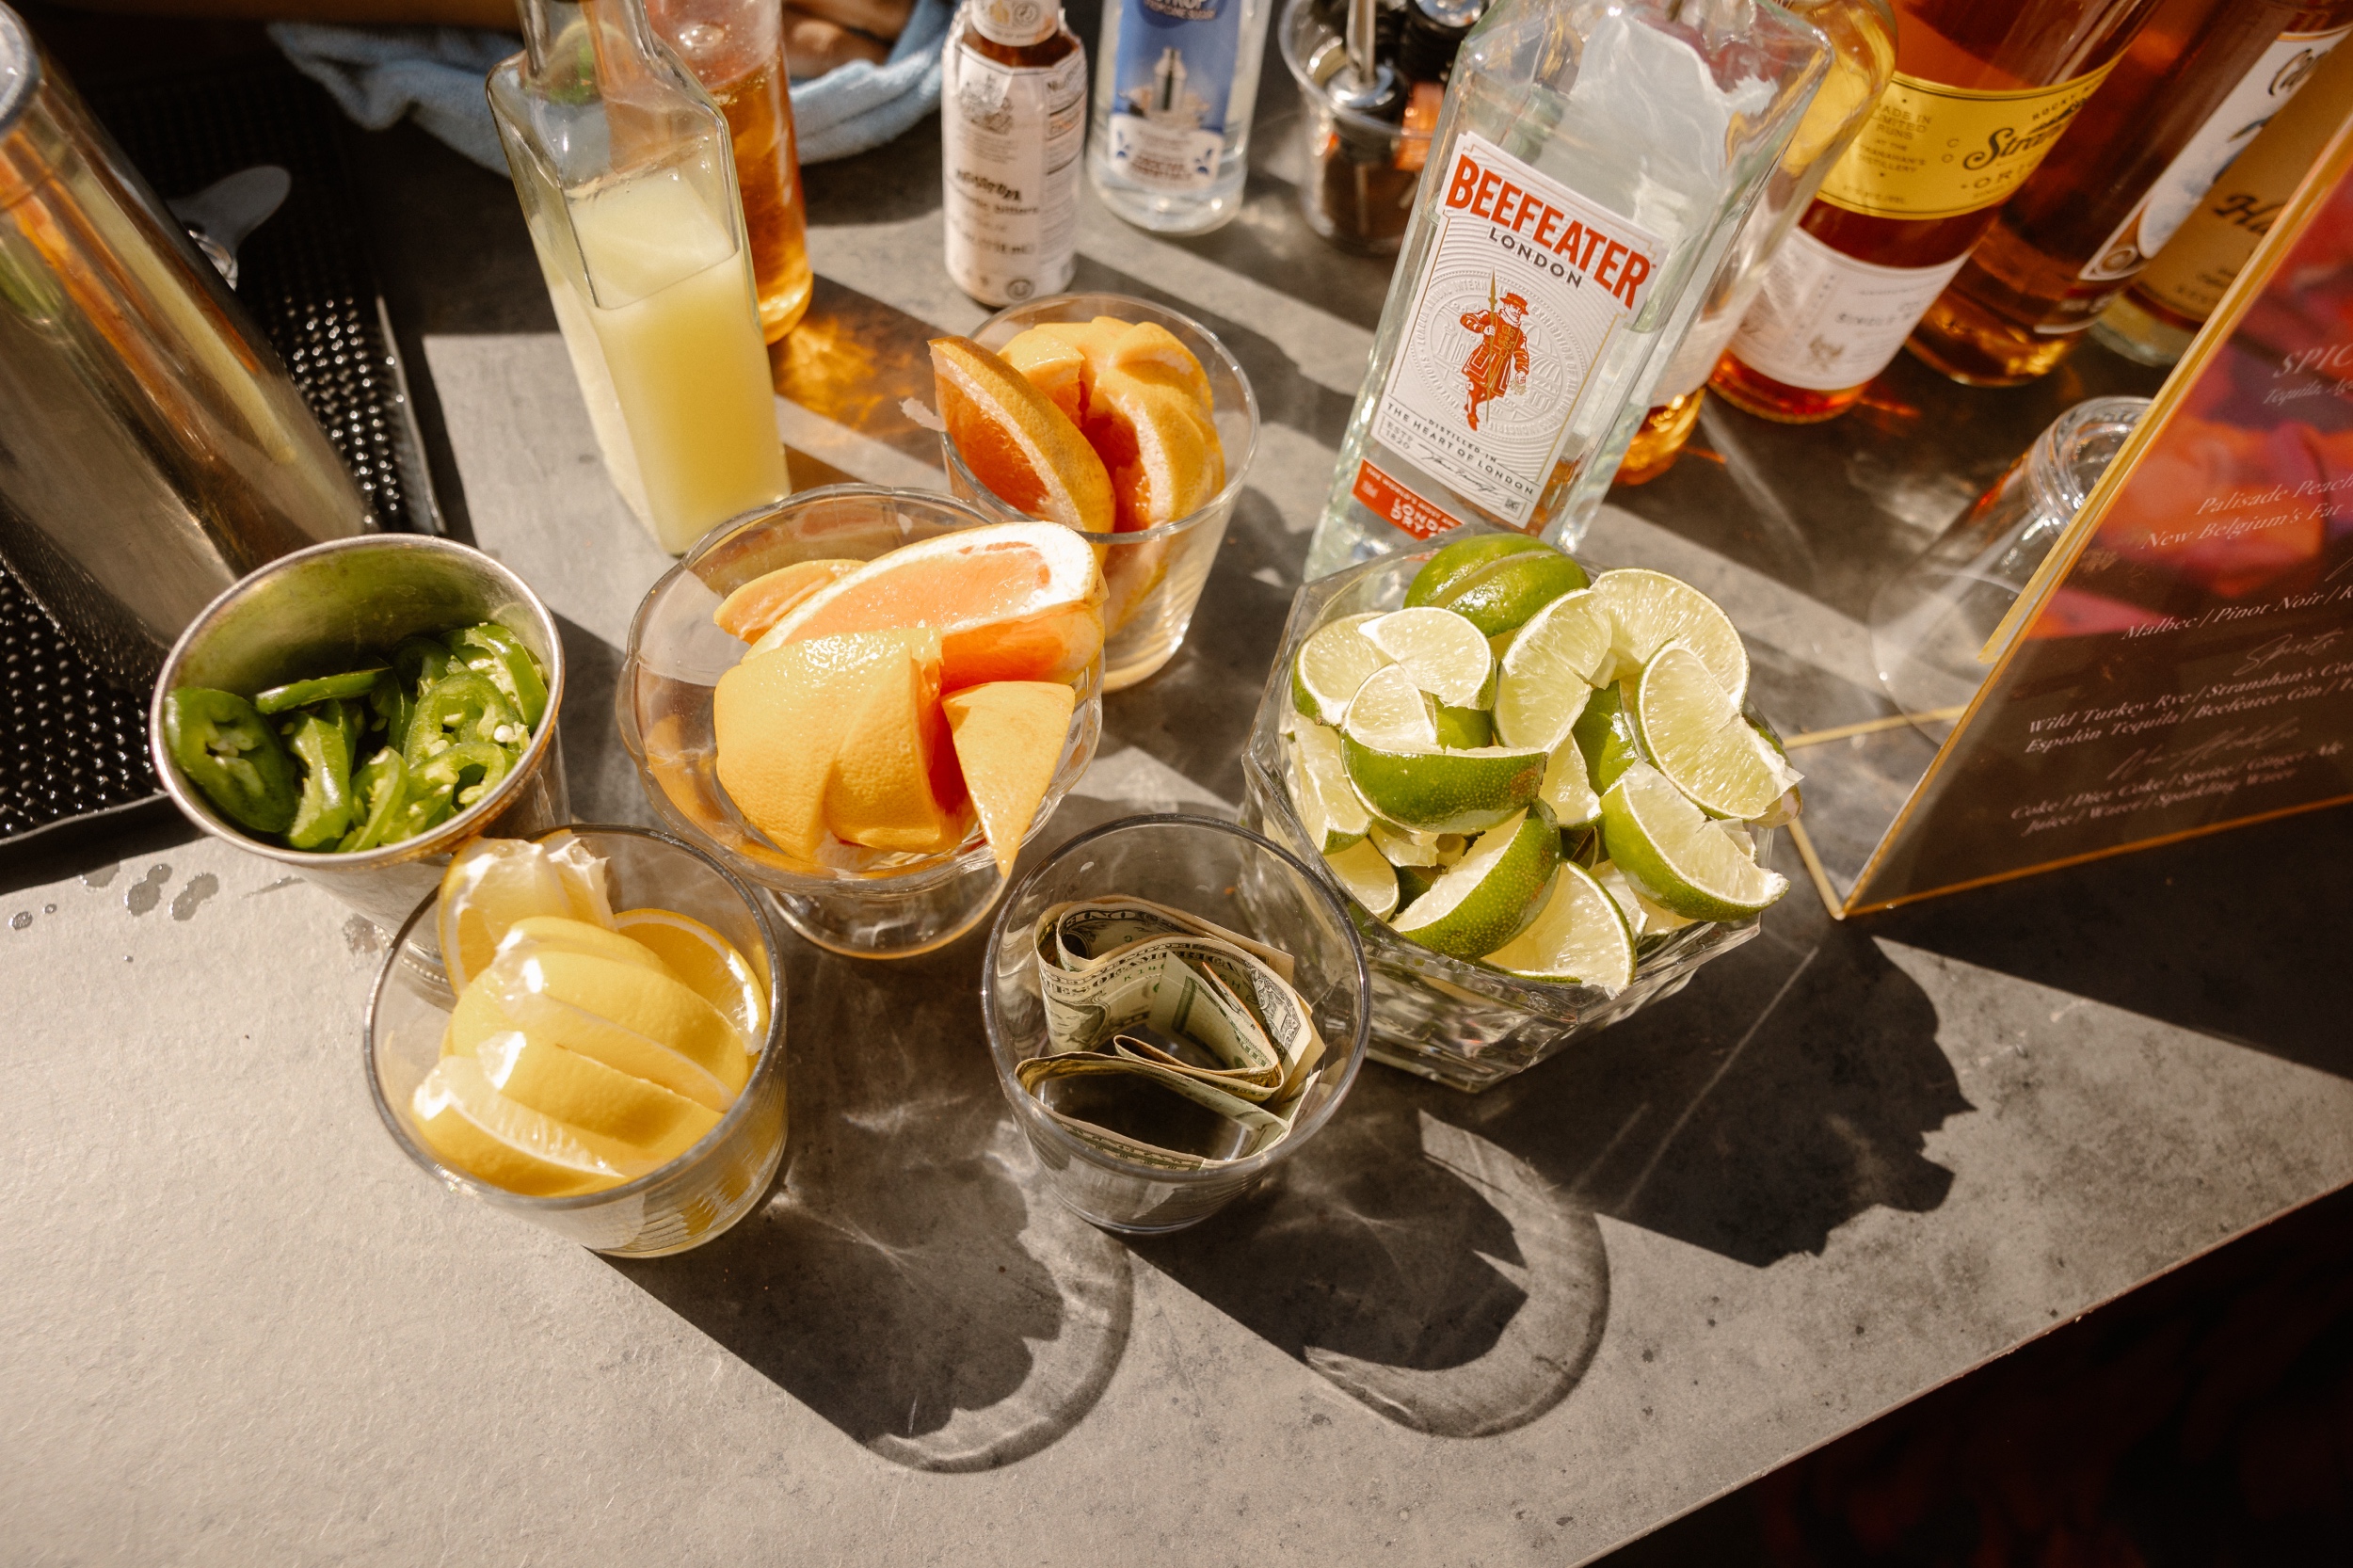 Cups of citrus, jalapenos, and cash with bottles of liquor in the background, with a focus on Beefeater Gin. Photo by Colorado wedding photographer Ashley Joyce.